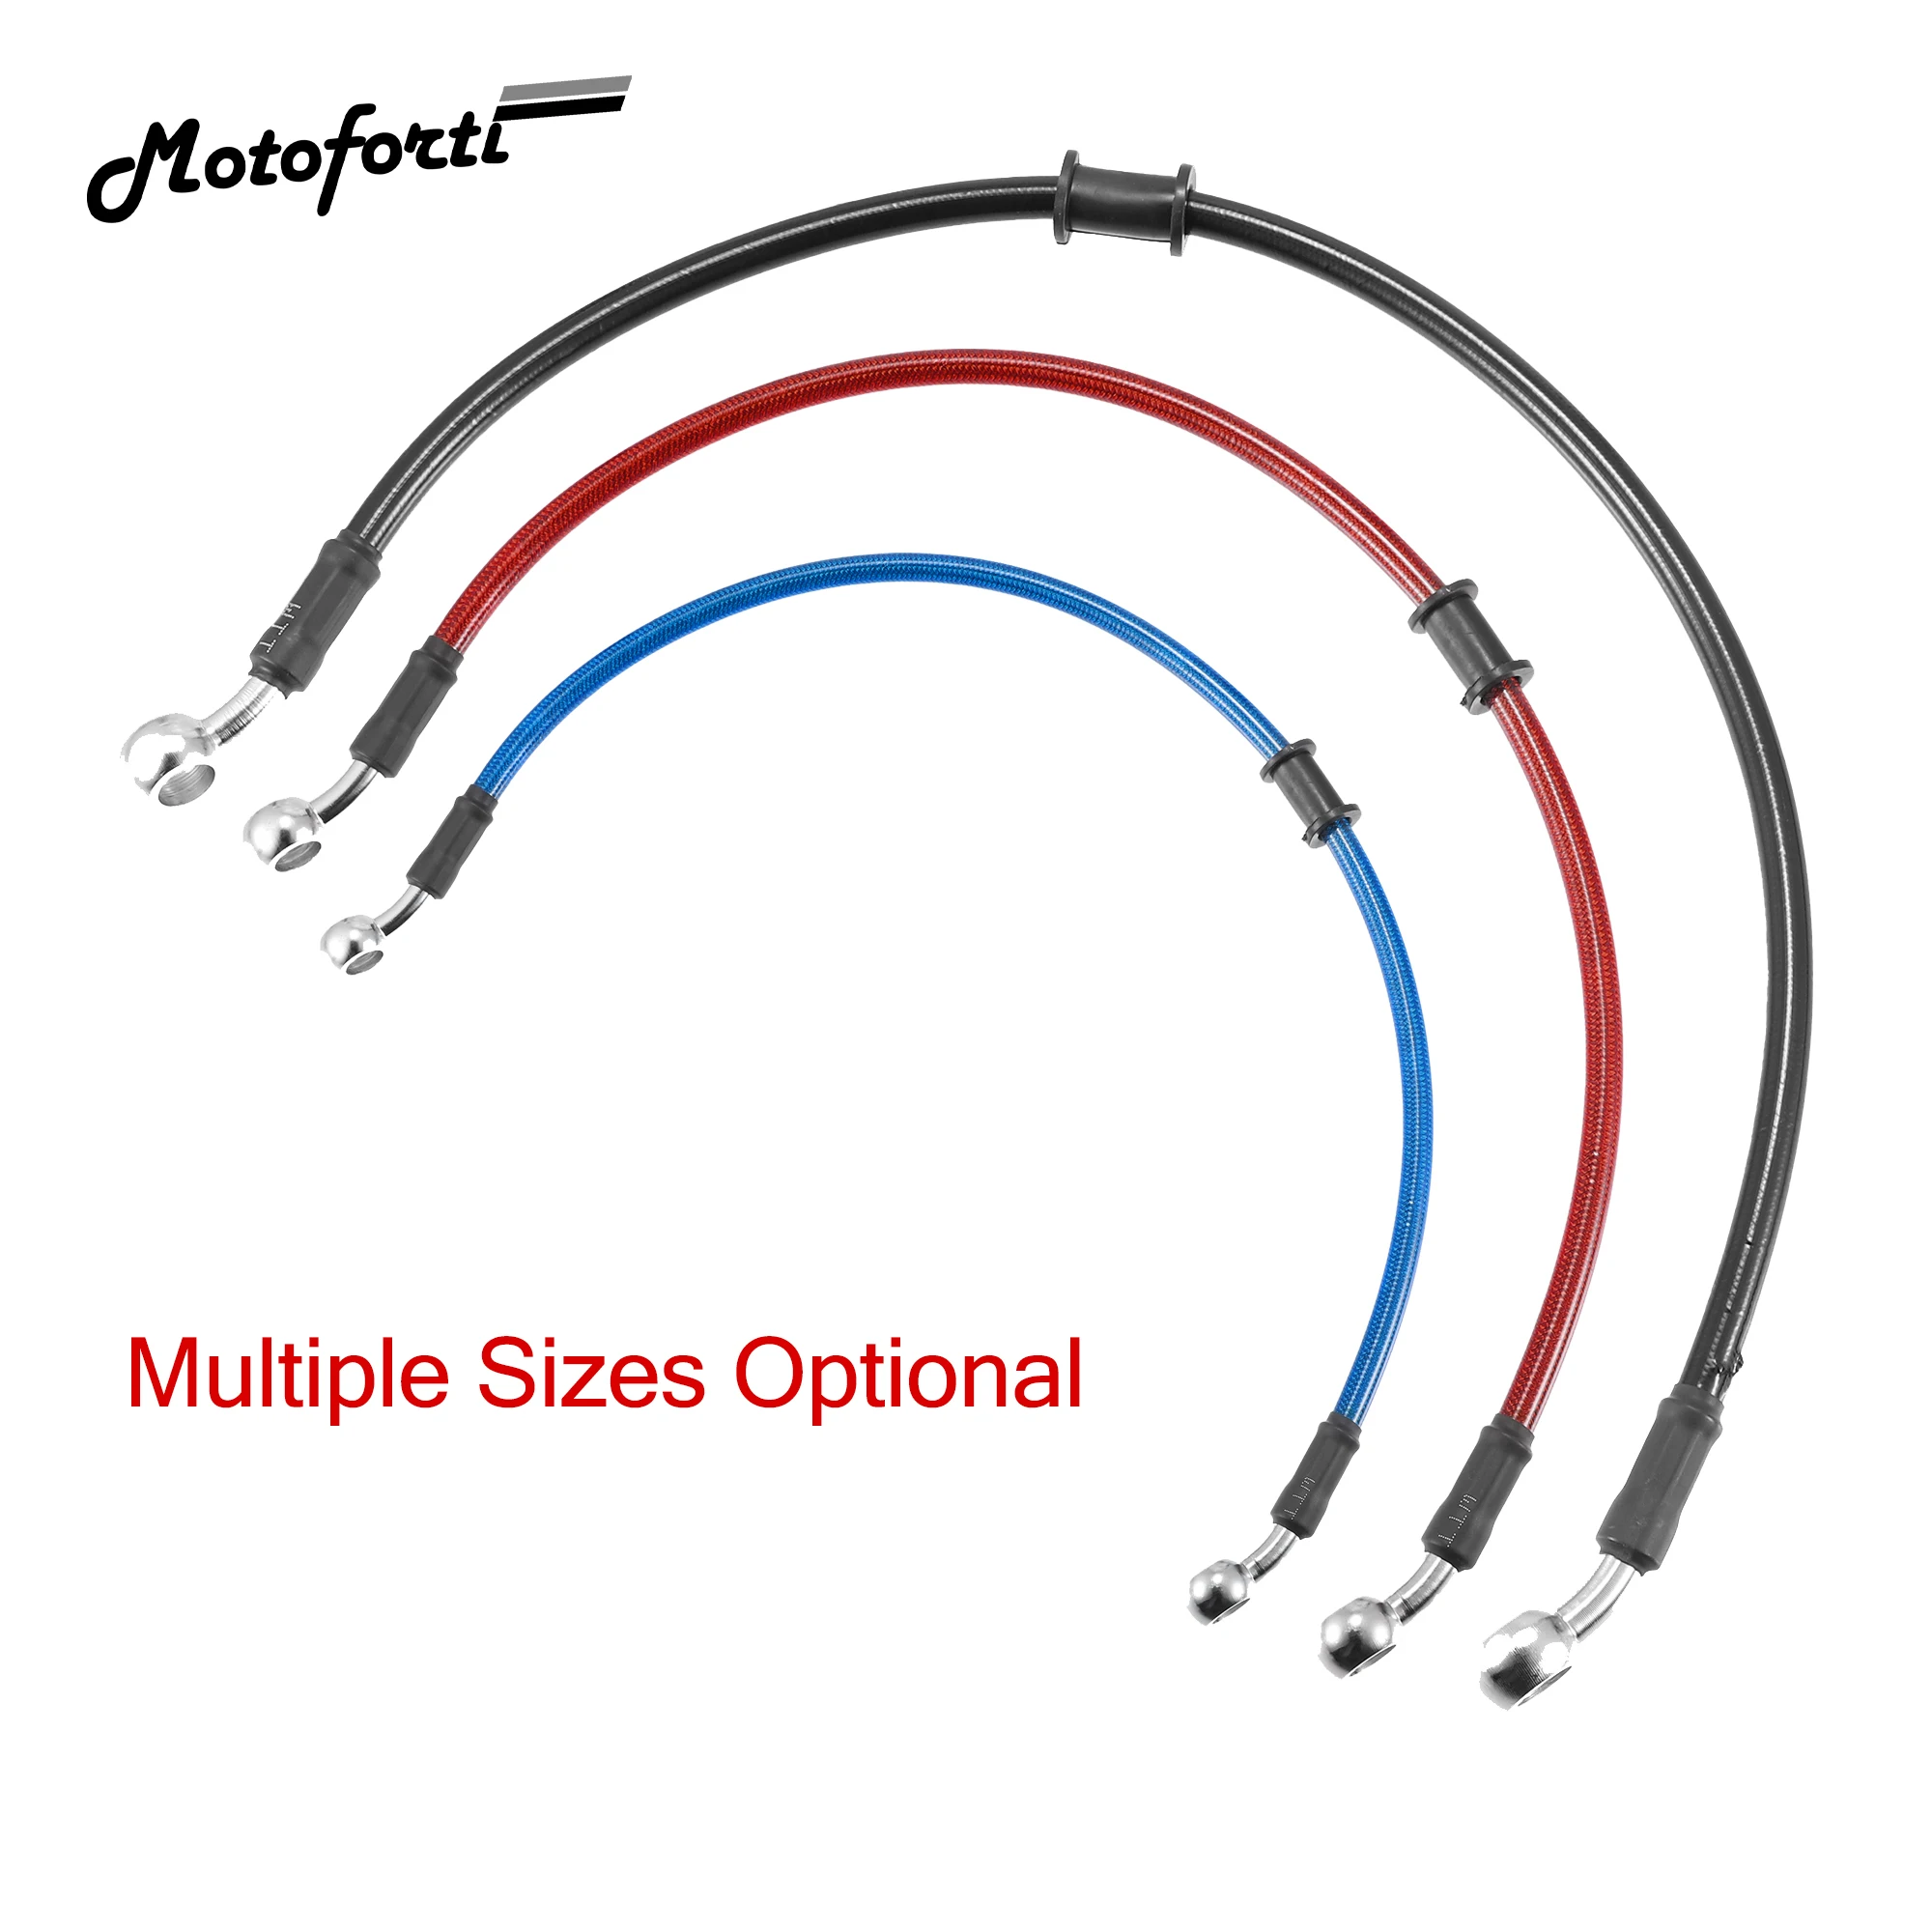 

Motoforti 50cm 90cm 120cm 130cm 19.69"-51.18" Length Motorcycle Hydraulic Brake Line Oil Hose Pipe Braided Cable 10mm ID